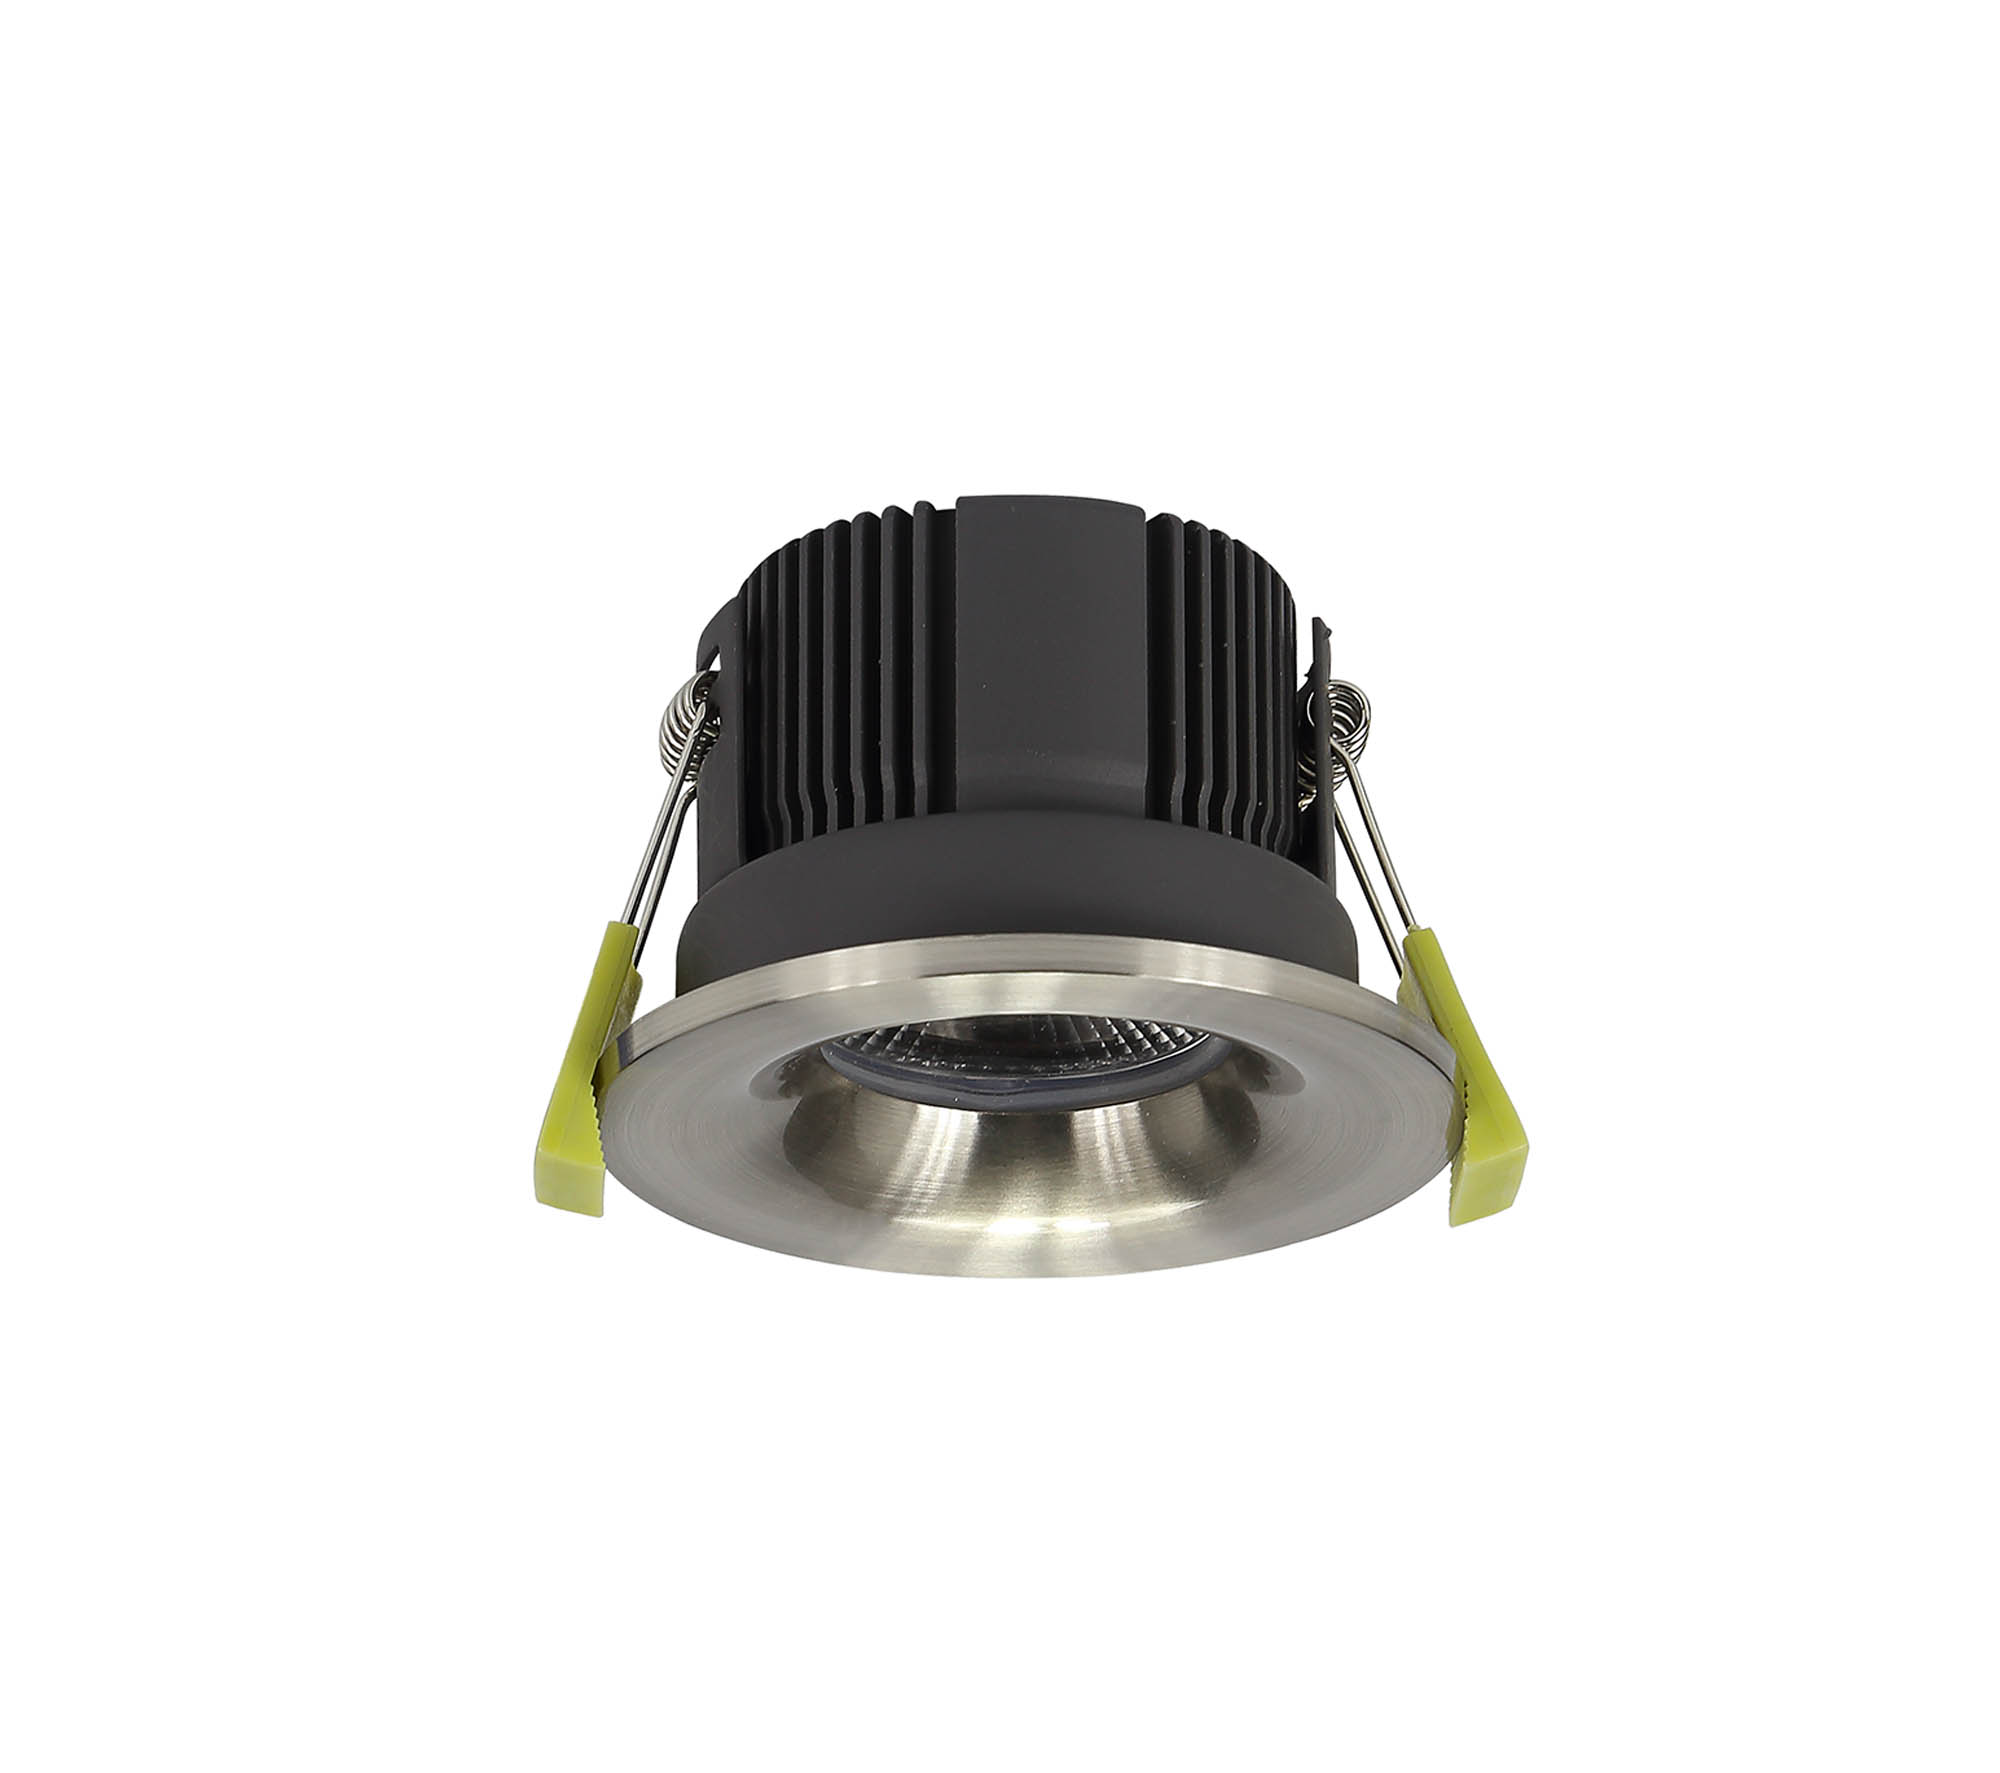 DM200688  Beck 11 FR, 11W, IP65 Satin Nickel LED Recessed Curved Fire Rated Downlight, Cut Out 68mm, 4000K, PLUG IN DRIVER INCLUDED, 3yrs Warranty